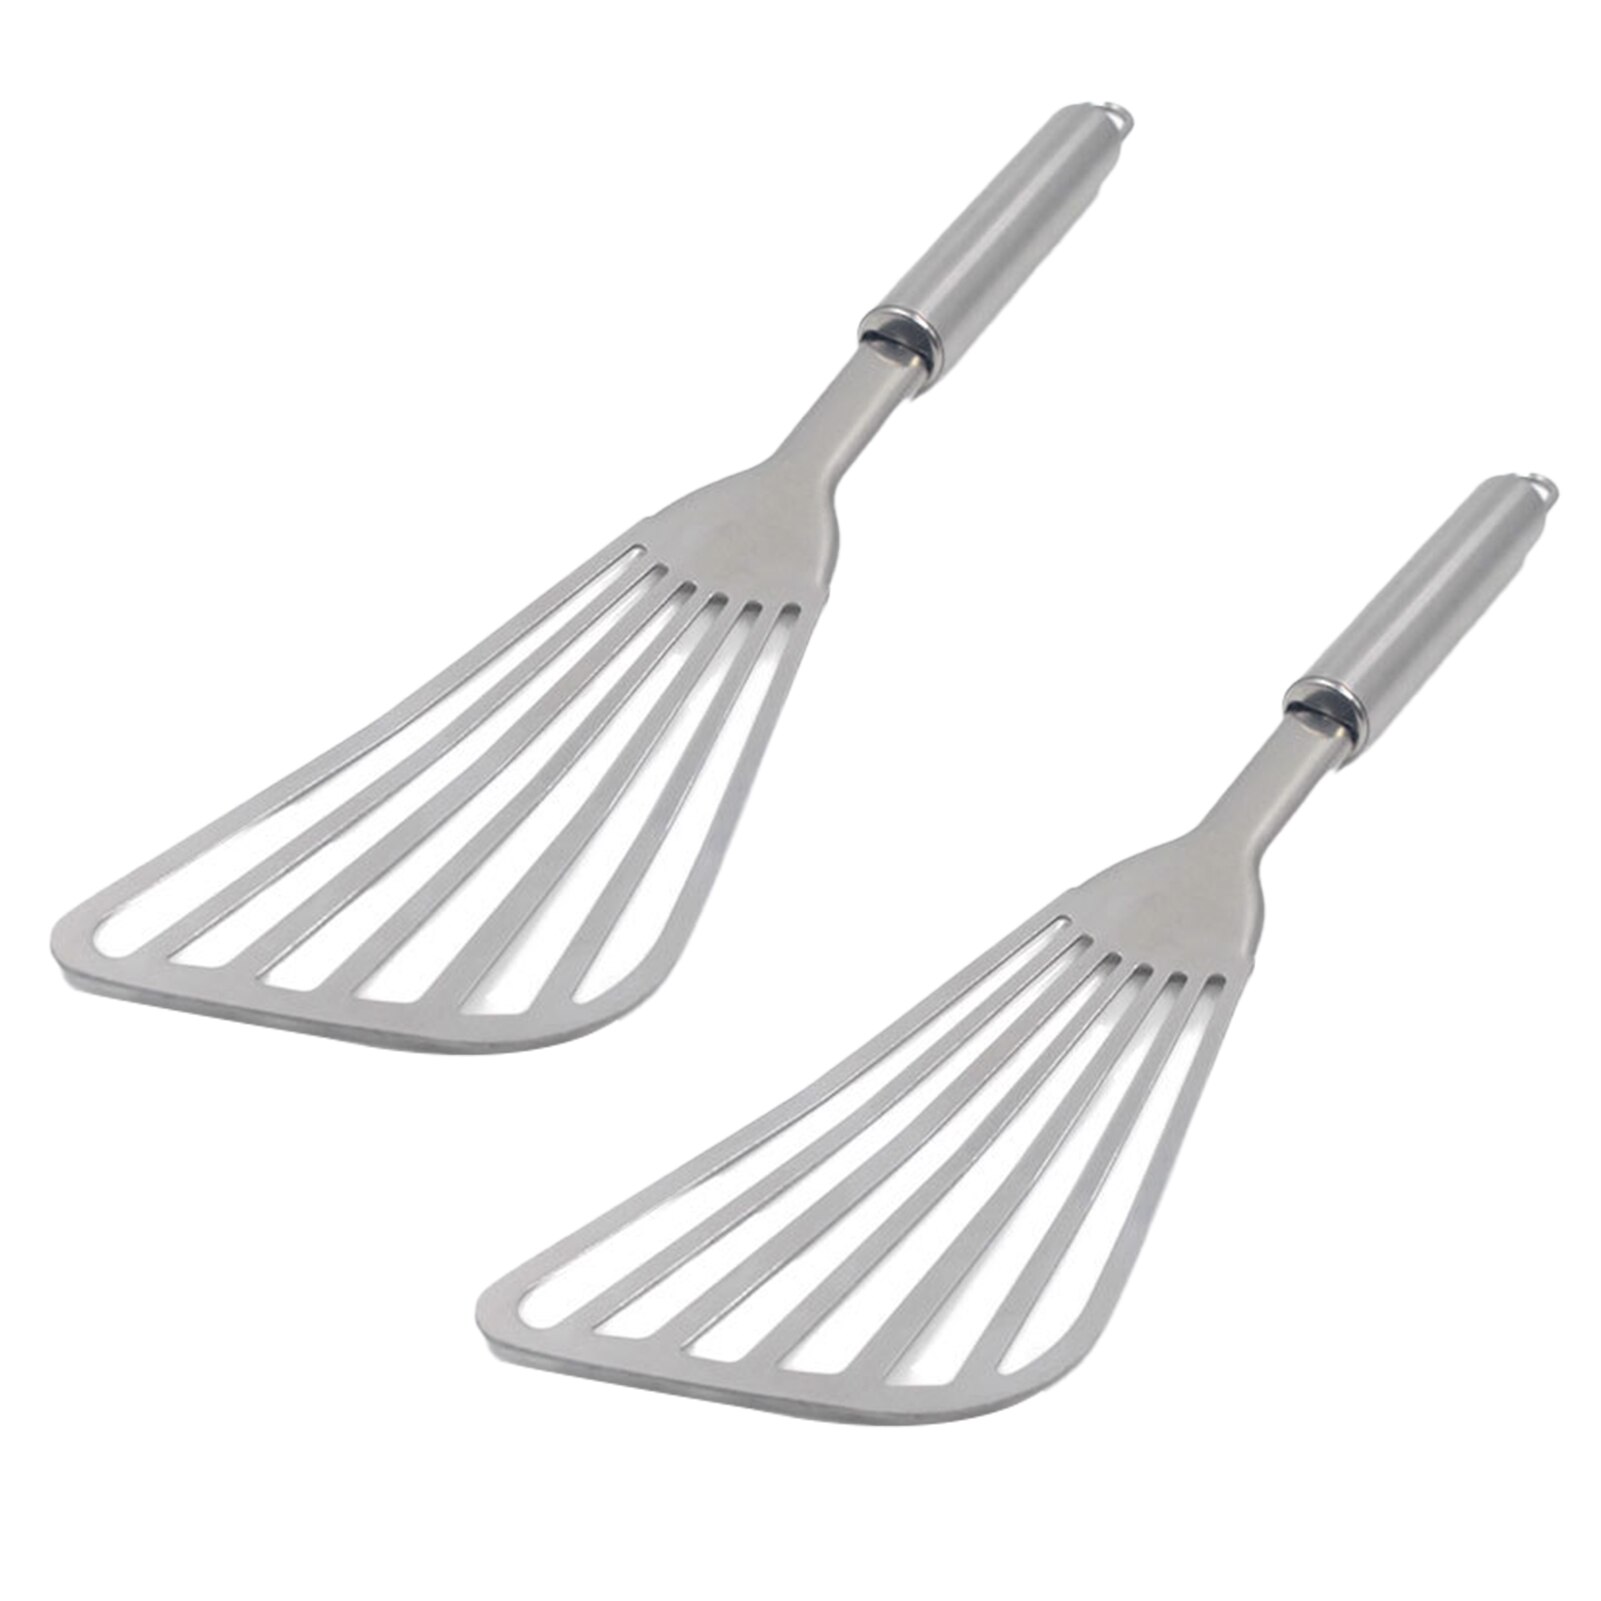 2pcs Fries Fish Spatula Slotted Turner Stainless Steel Professional Frying Shovel Meat Leaky Home Long Handle Kitchen Tools